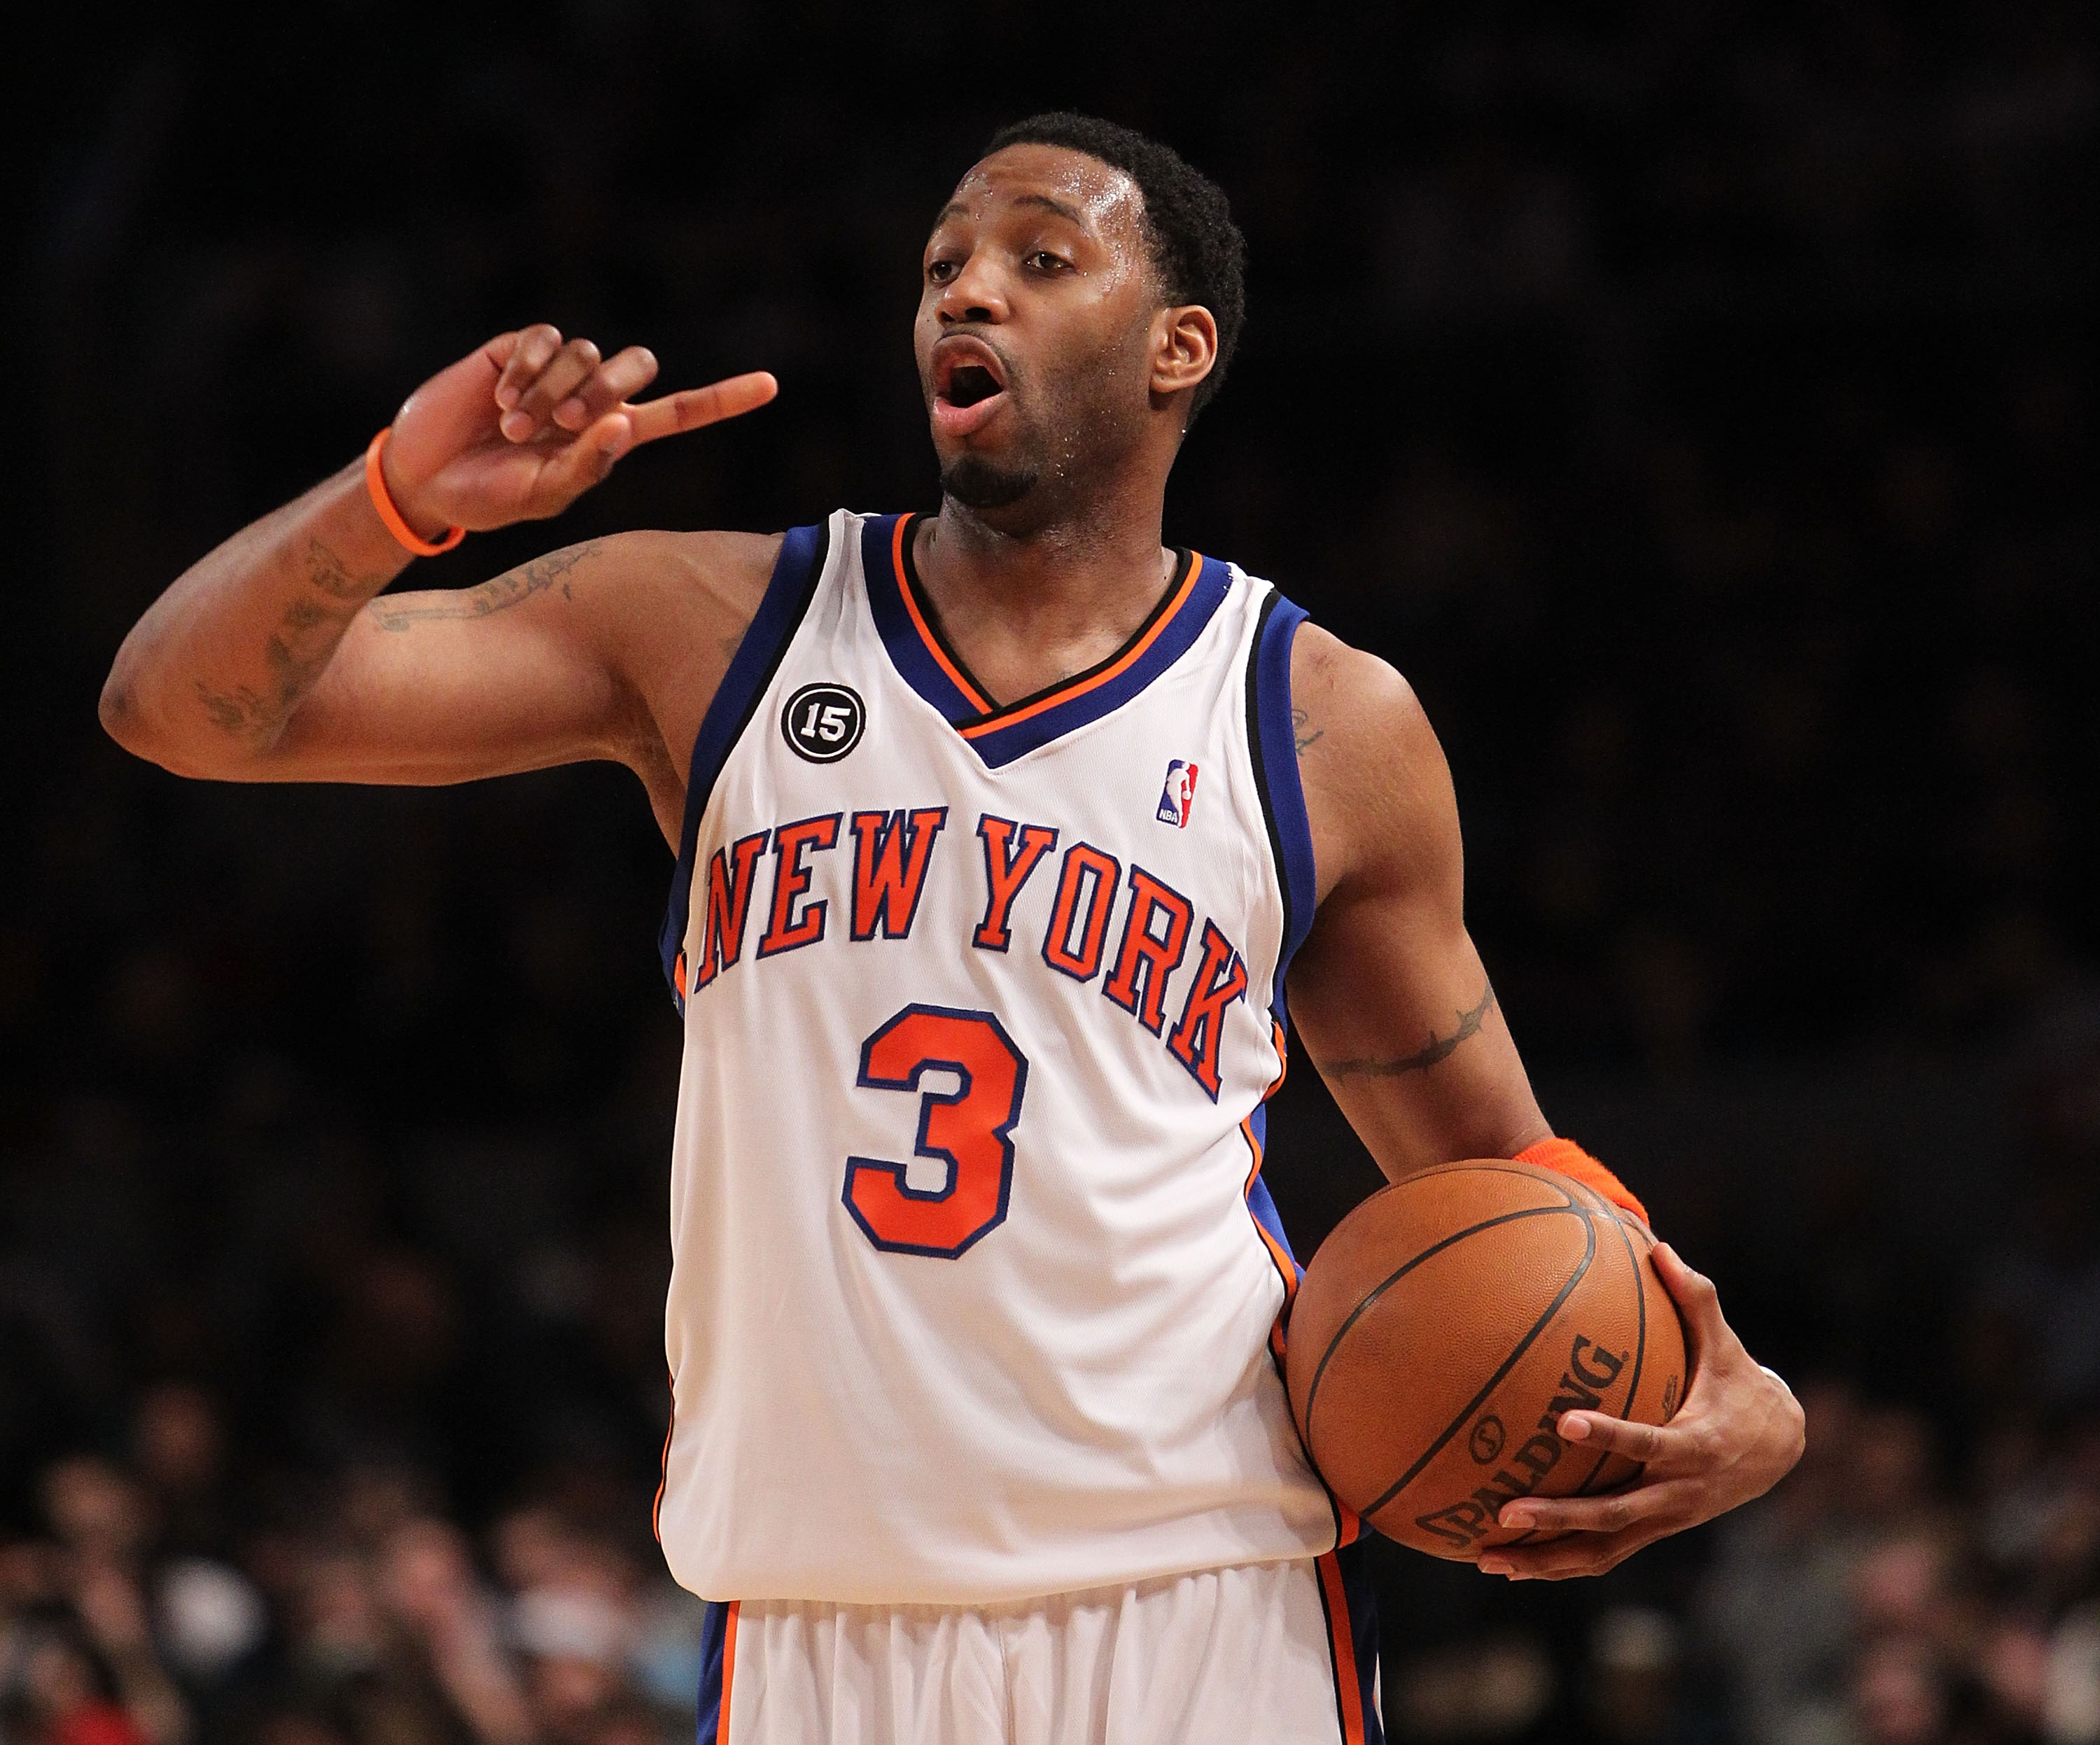 NEW YORK - FEBRUARY 20:  Tracy McGrady #3 of the New York Knicks gestures against the Oklahoma City Thunder at Madison Square Garden on February 20, 2010 in New York, New York. NOTE TO USER: User expressly acknowledges and agrees that, by downloading and 